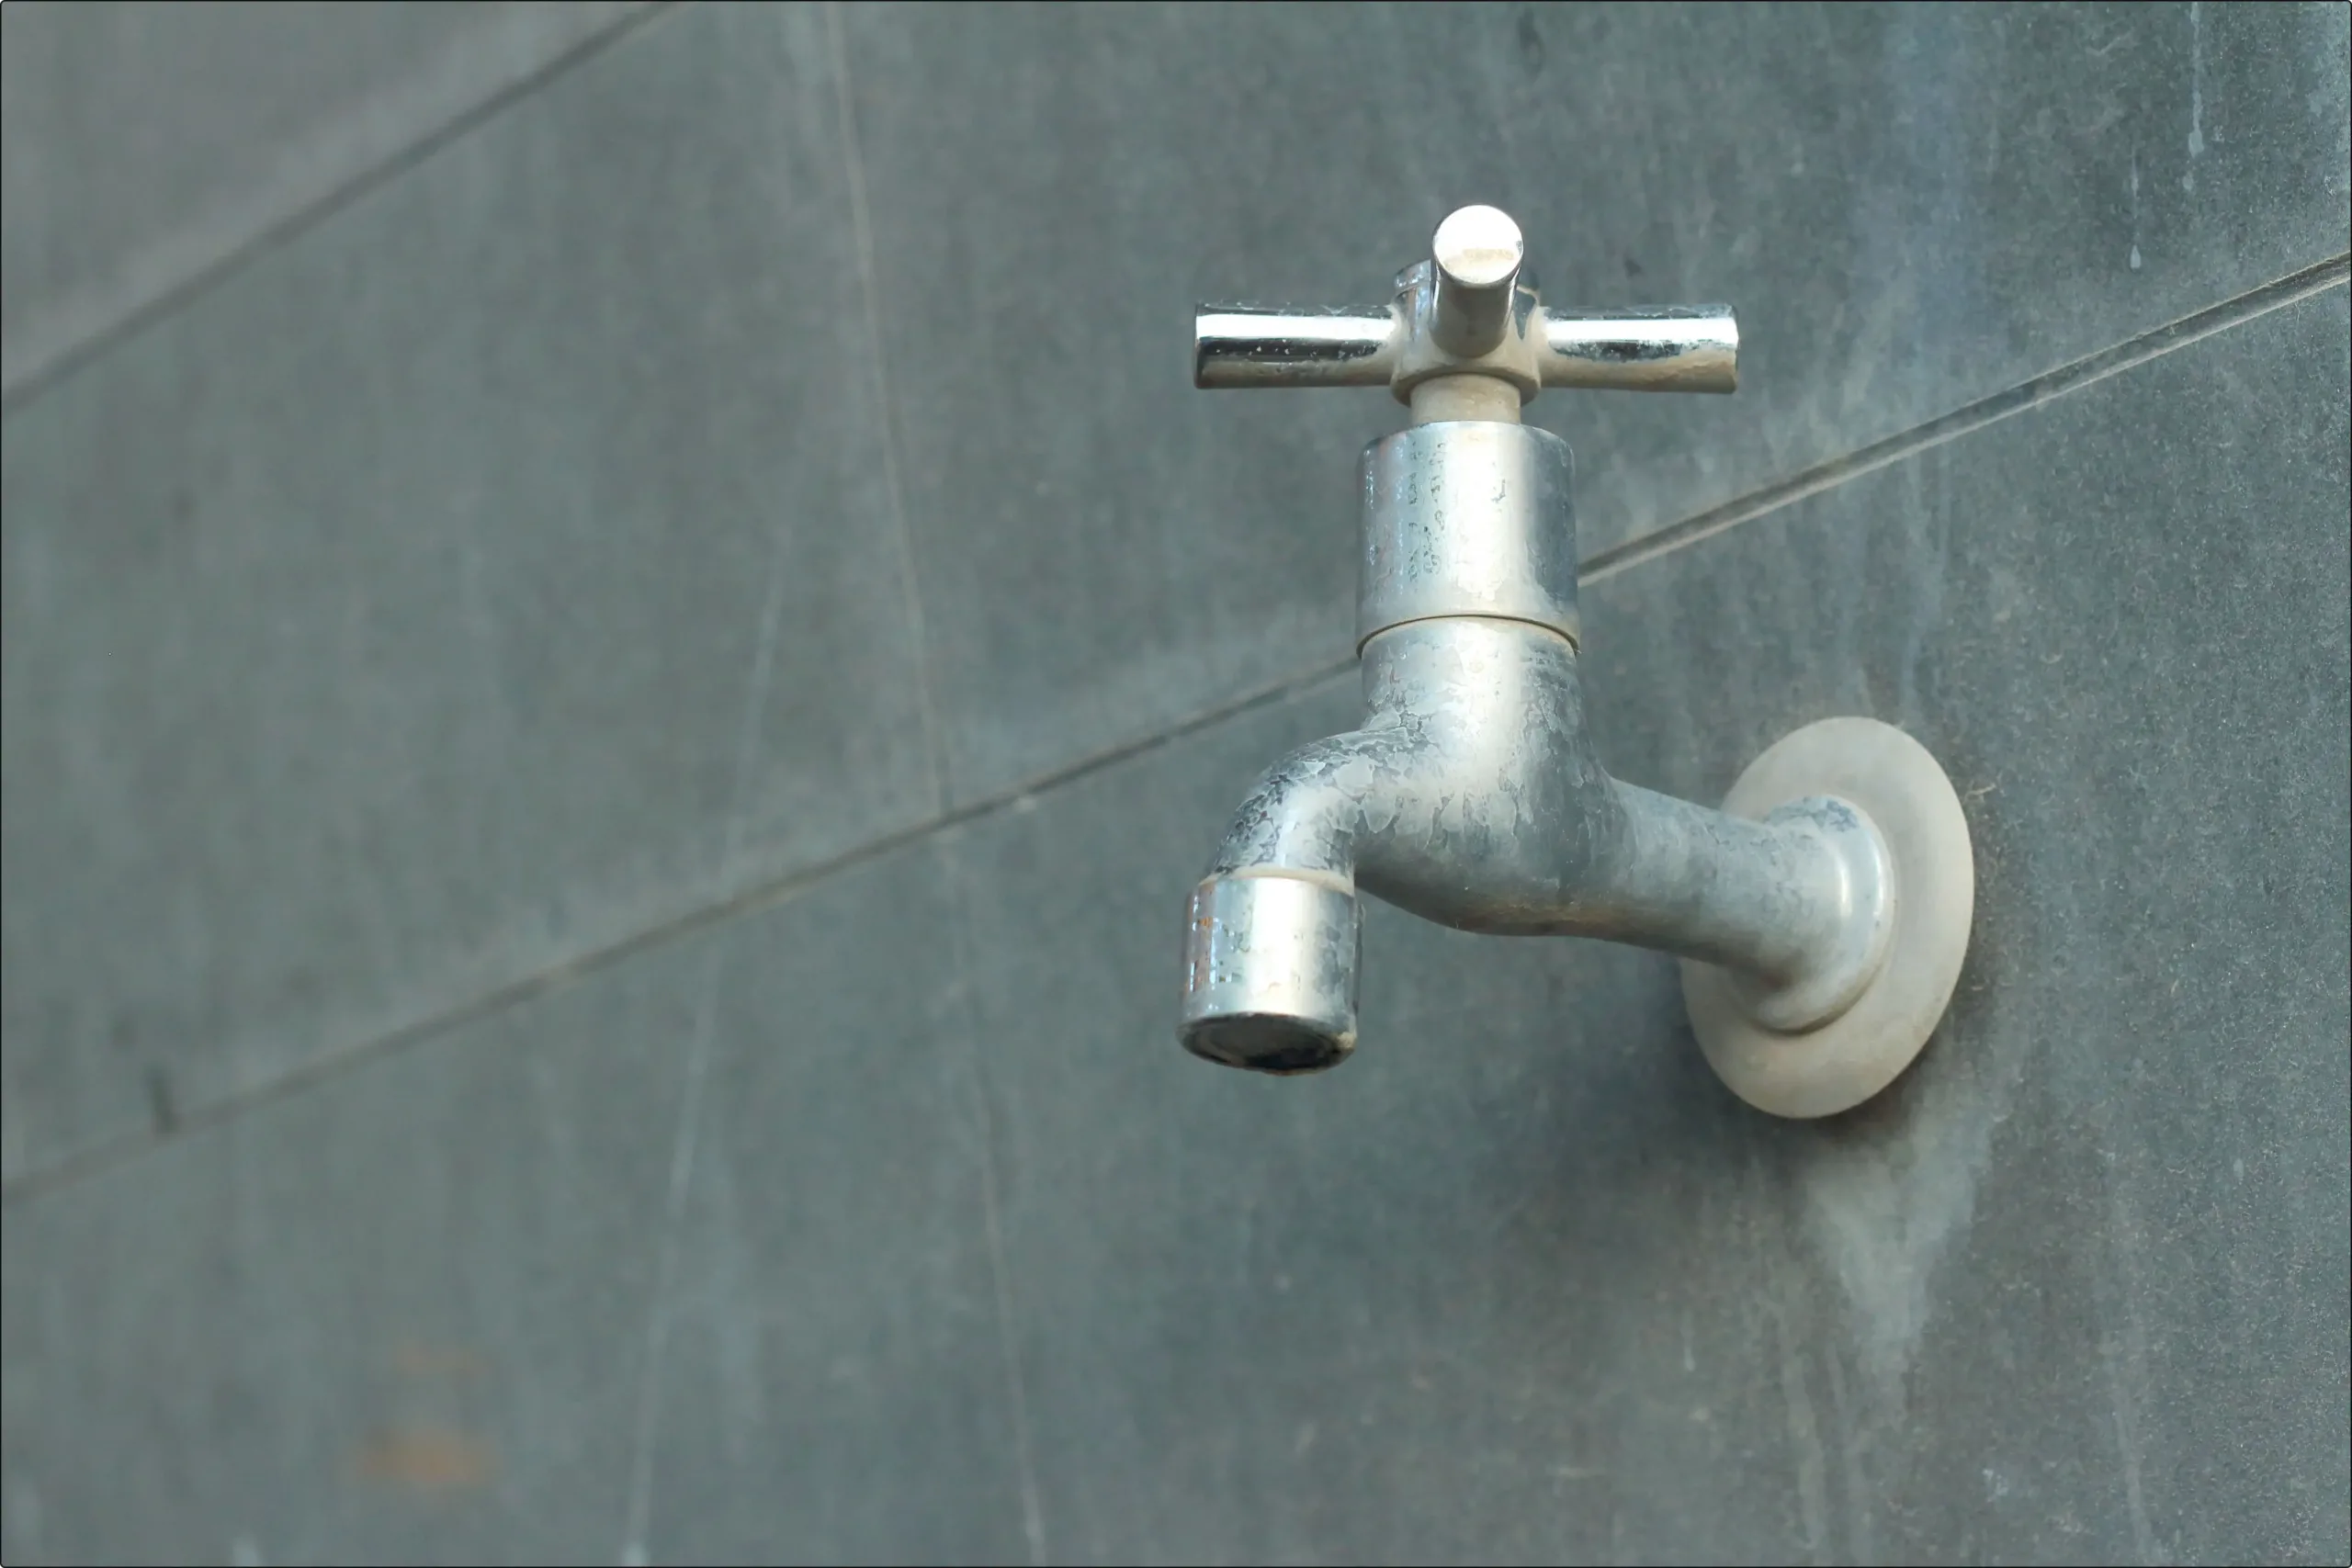 Metal tap on grey wall with watermarks on the pipe